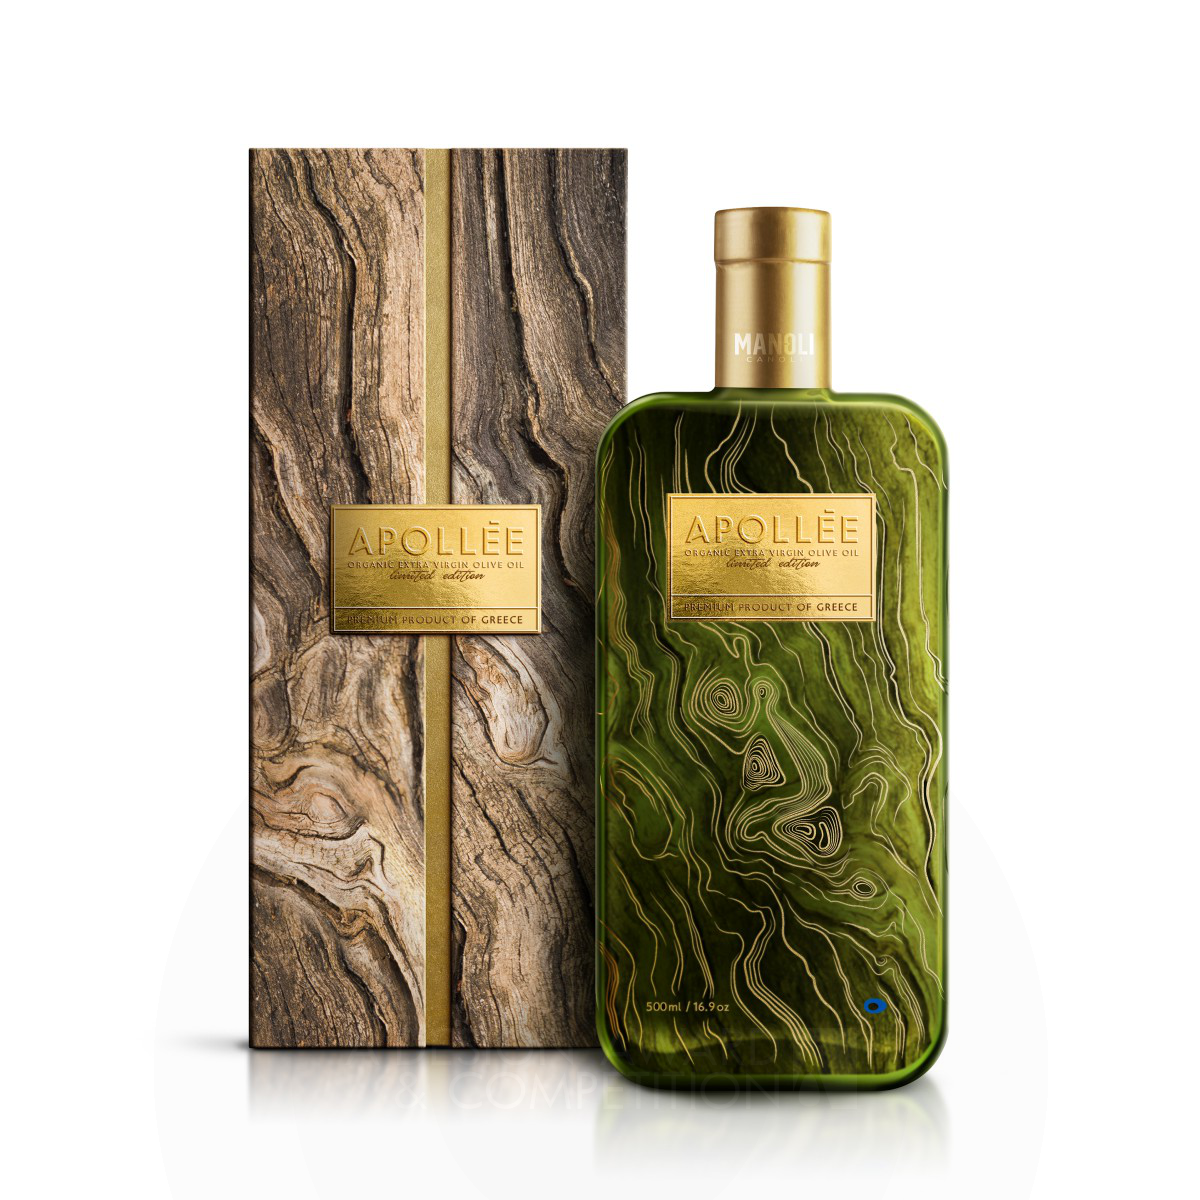 Antonia Skaraki wins Golden at the prestigious A' Packaging Design Award with Apollee Olive Oil Packaging.